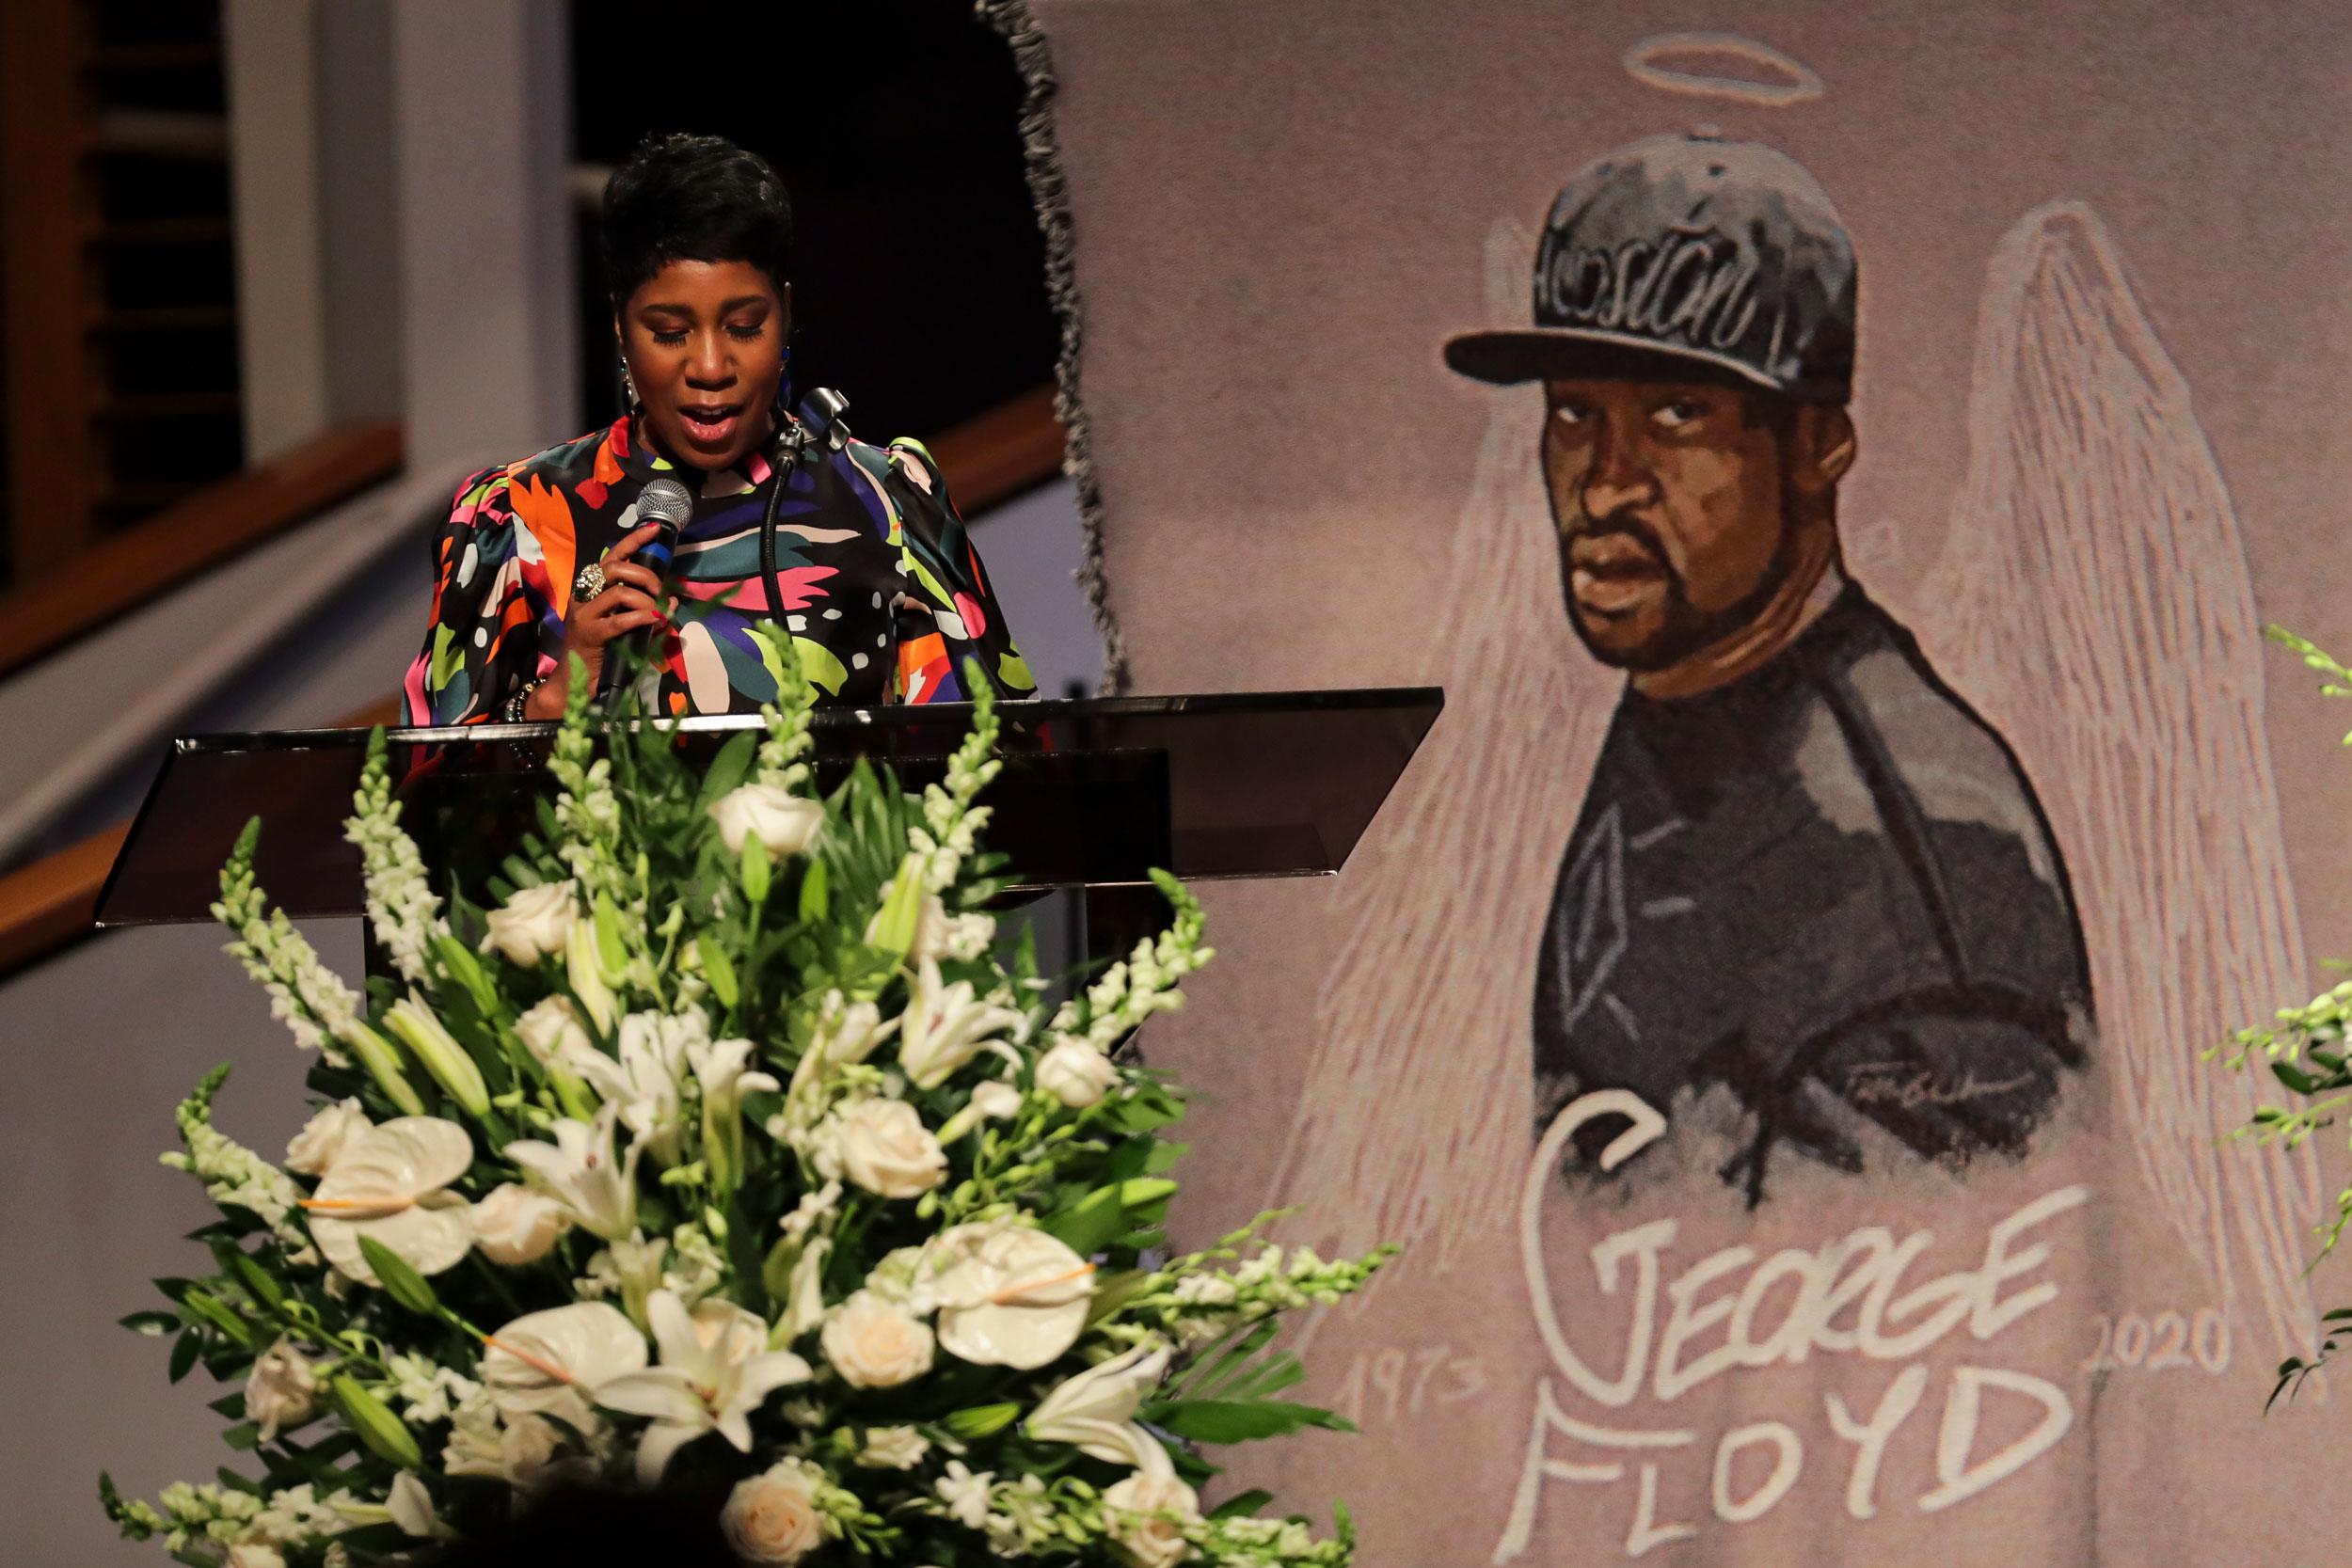 Ivy McGregor reads a resolution during the funeral for George Floyd on June 9 at The Fountain of Praise church in Houston.